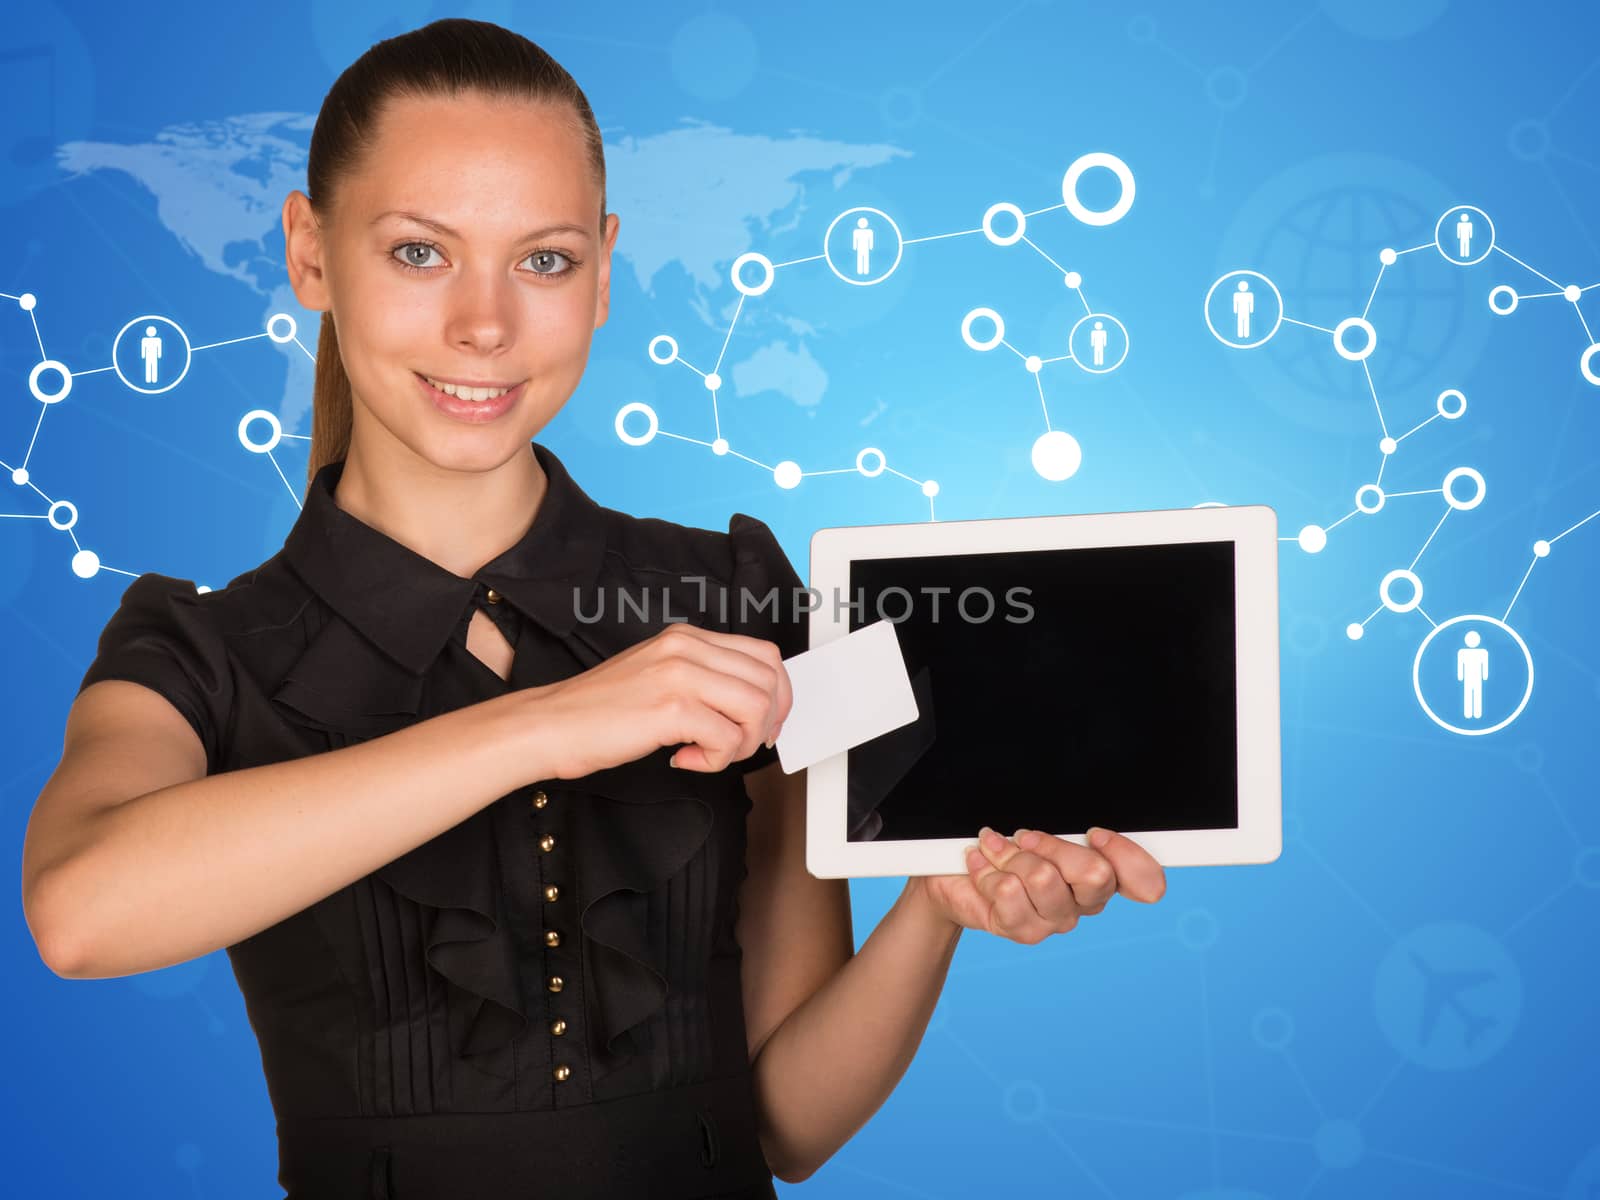 Beautiful businesswoman holding blank tablet PC and blank business card in front of PC screen. Network with people icons and world map as backdrop